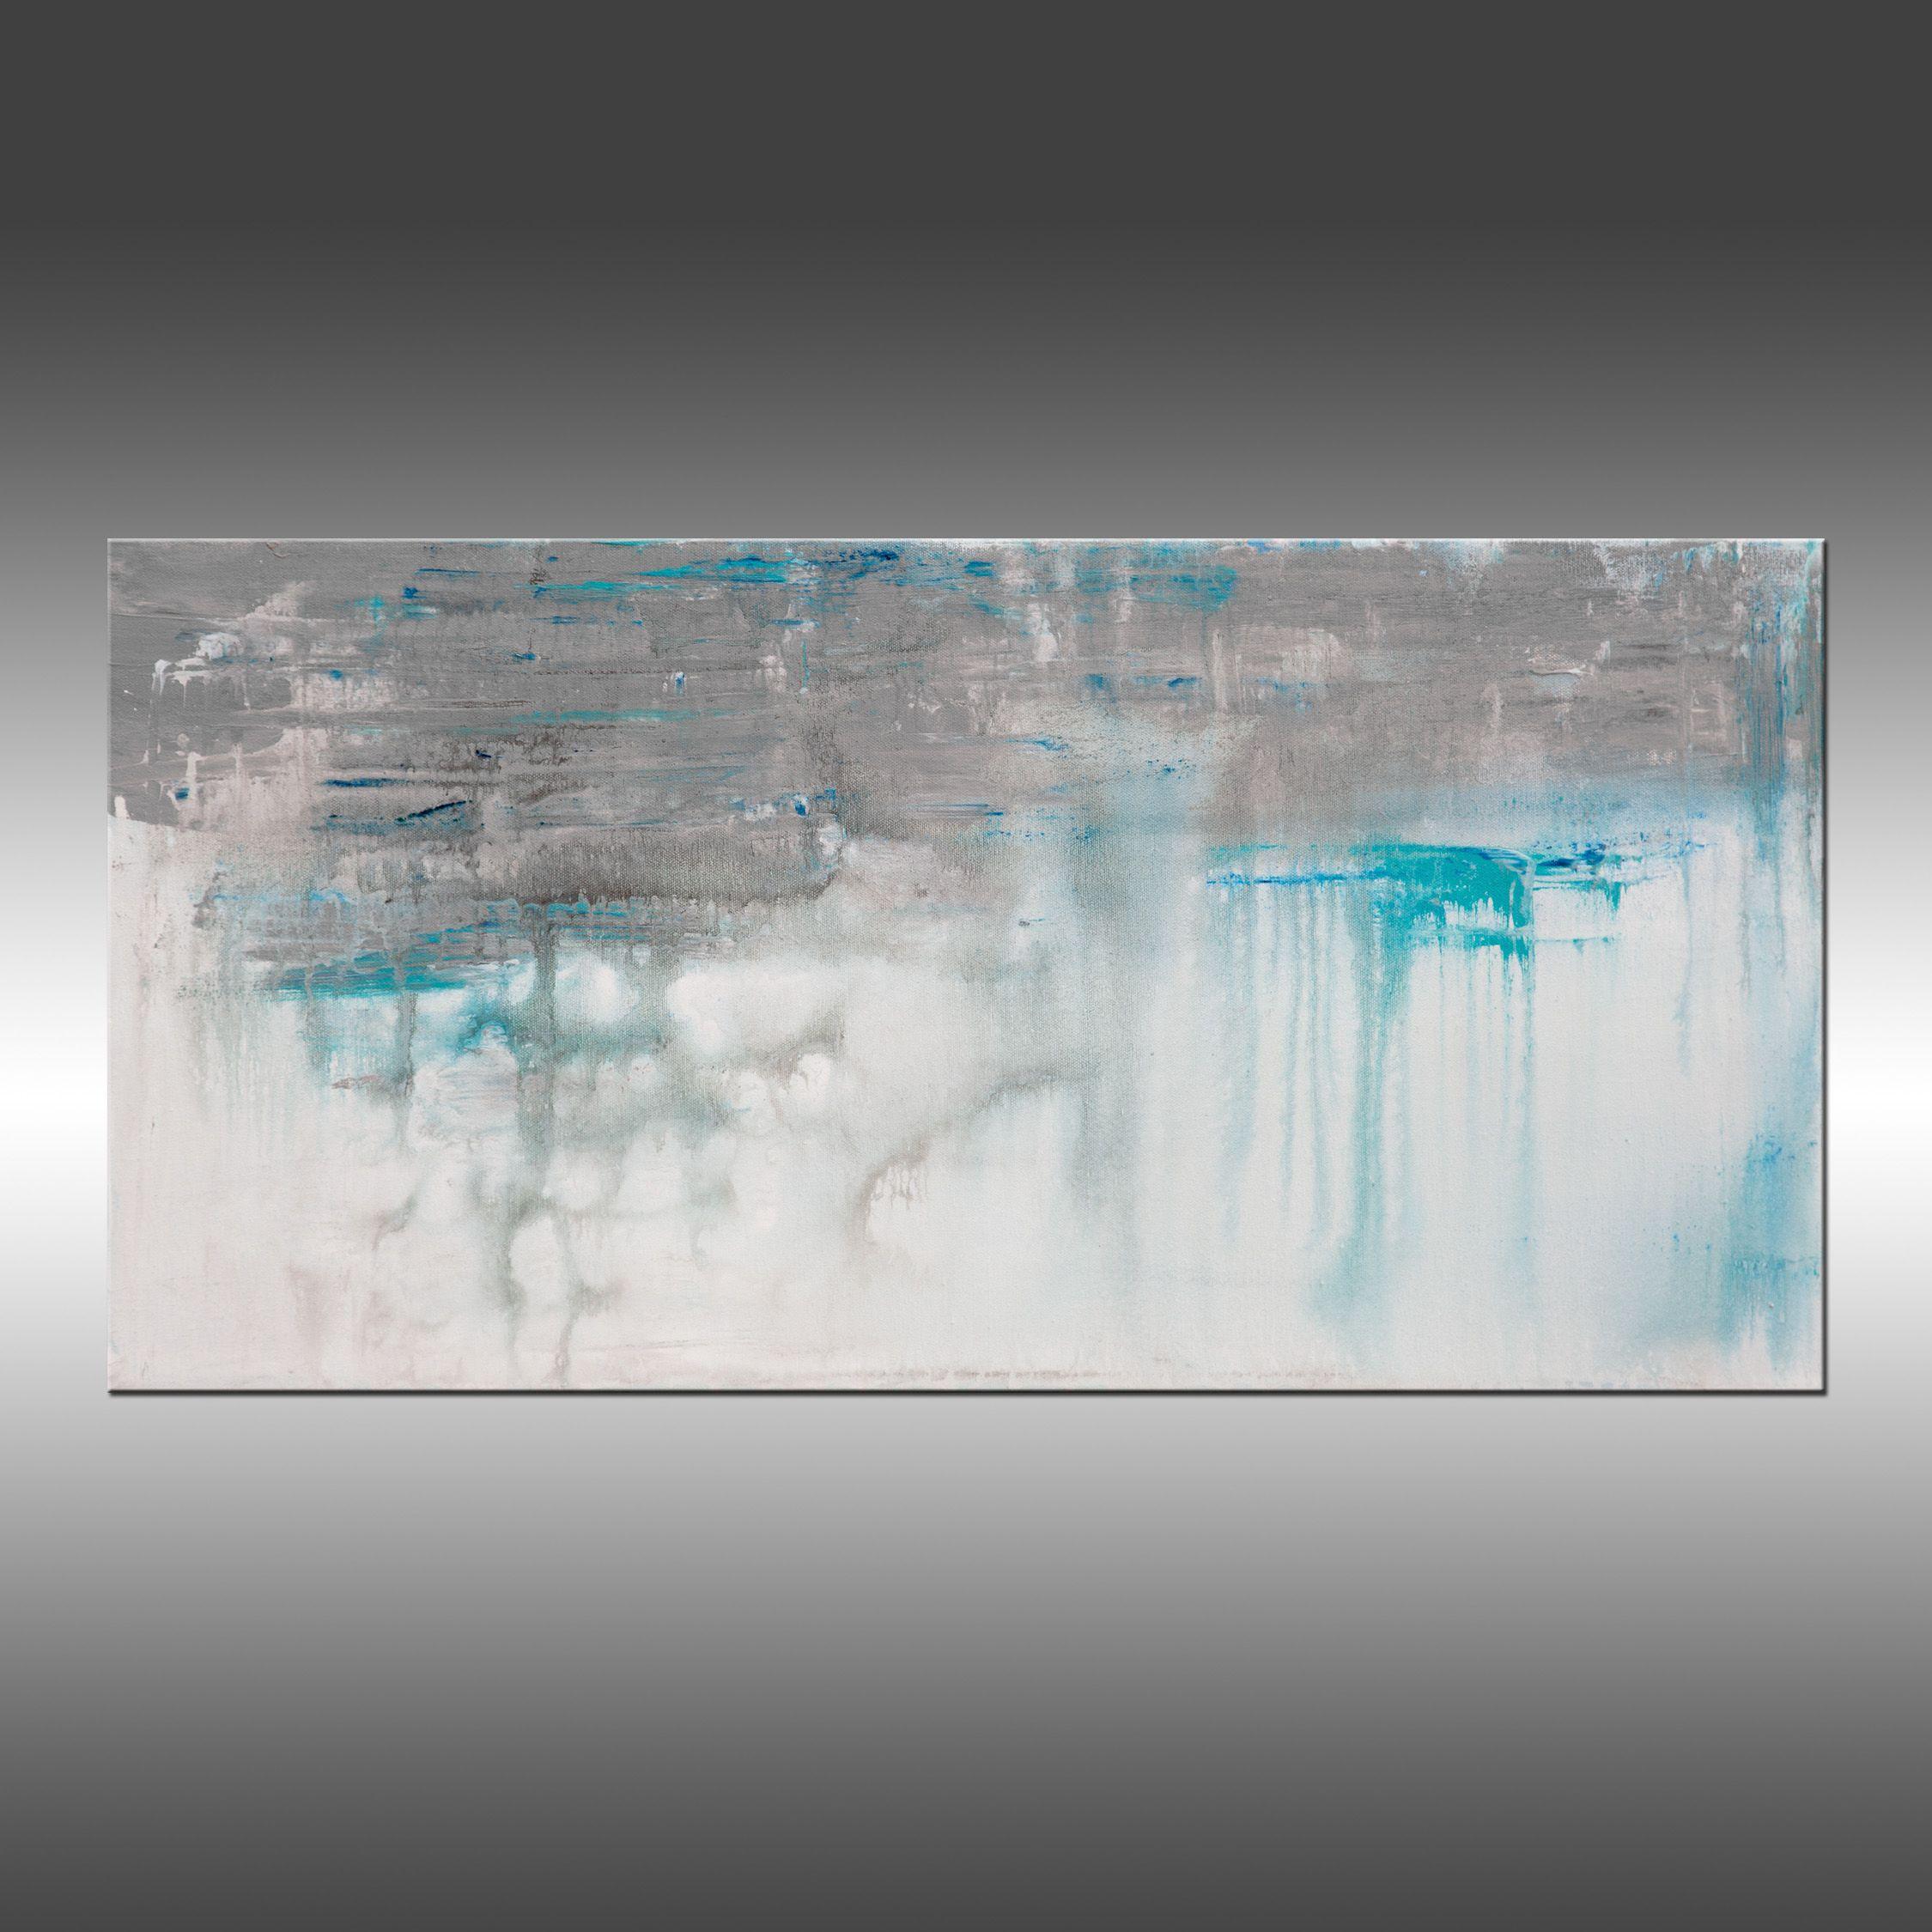 Lithosphere 182 is an original painting, created with acrylic paint on gallery-wrapped canvas. It has a width of 30 inches and a height of 15 inches with a depth of 1.5 inches (15x30x1.5). The painting continues onto the edges of the canvas,